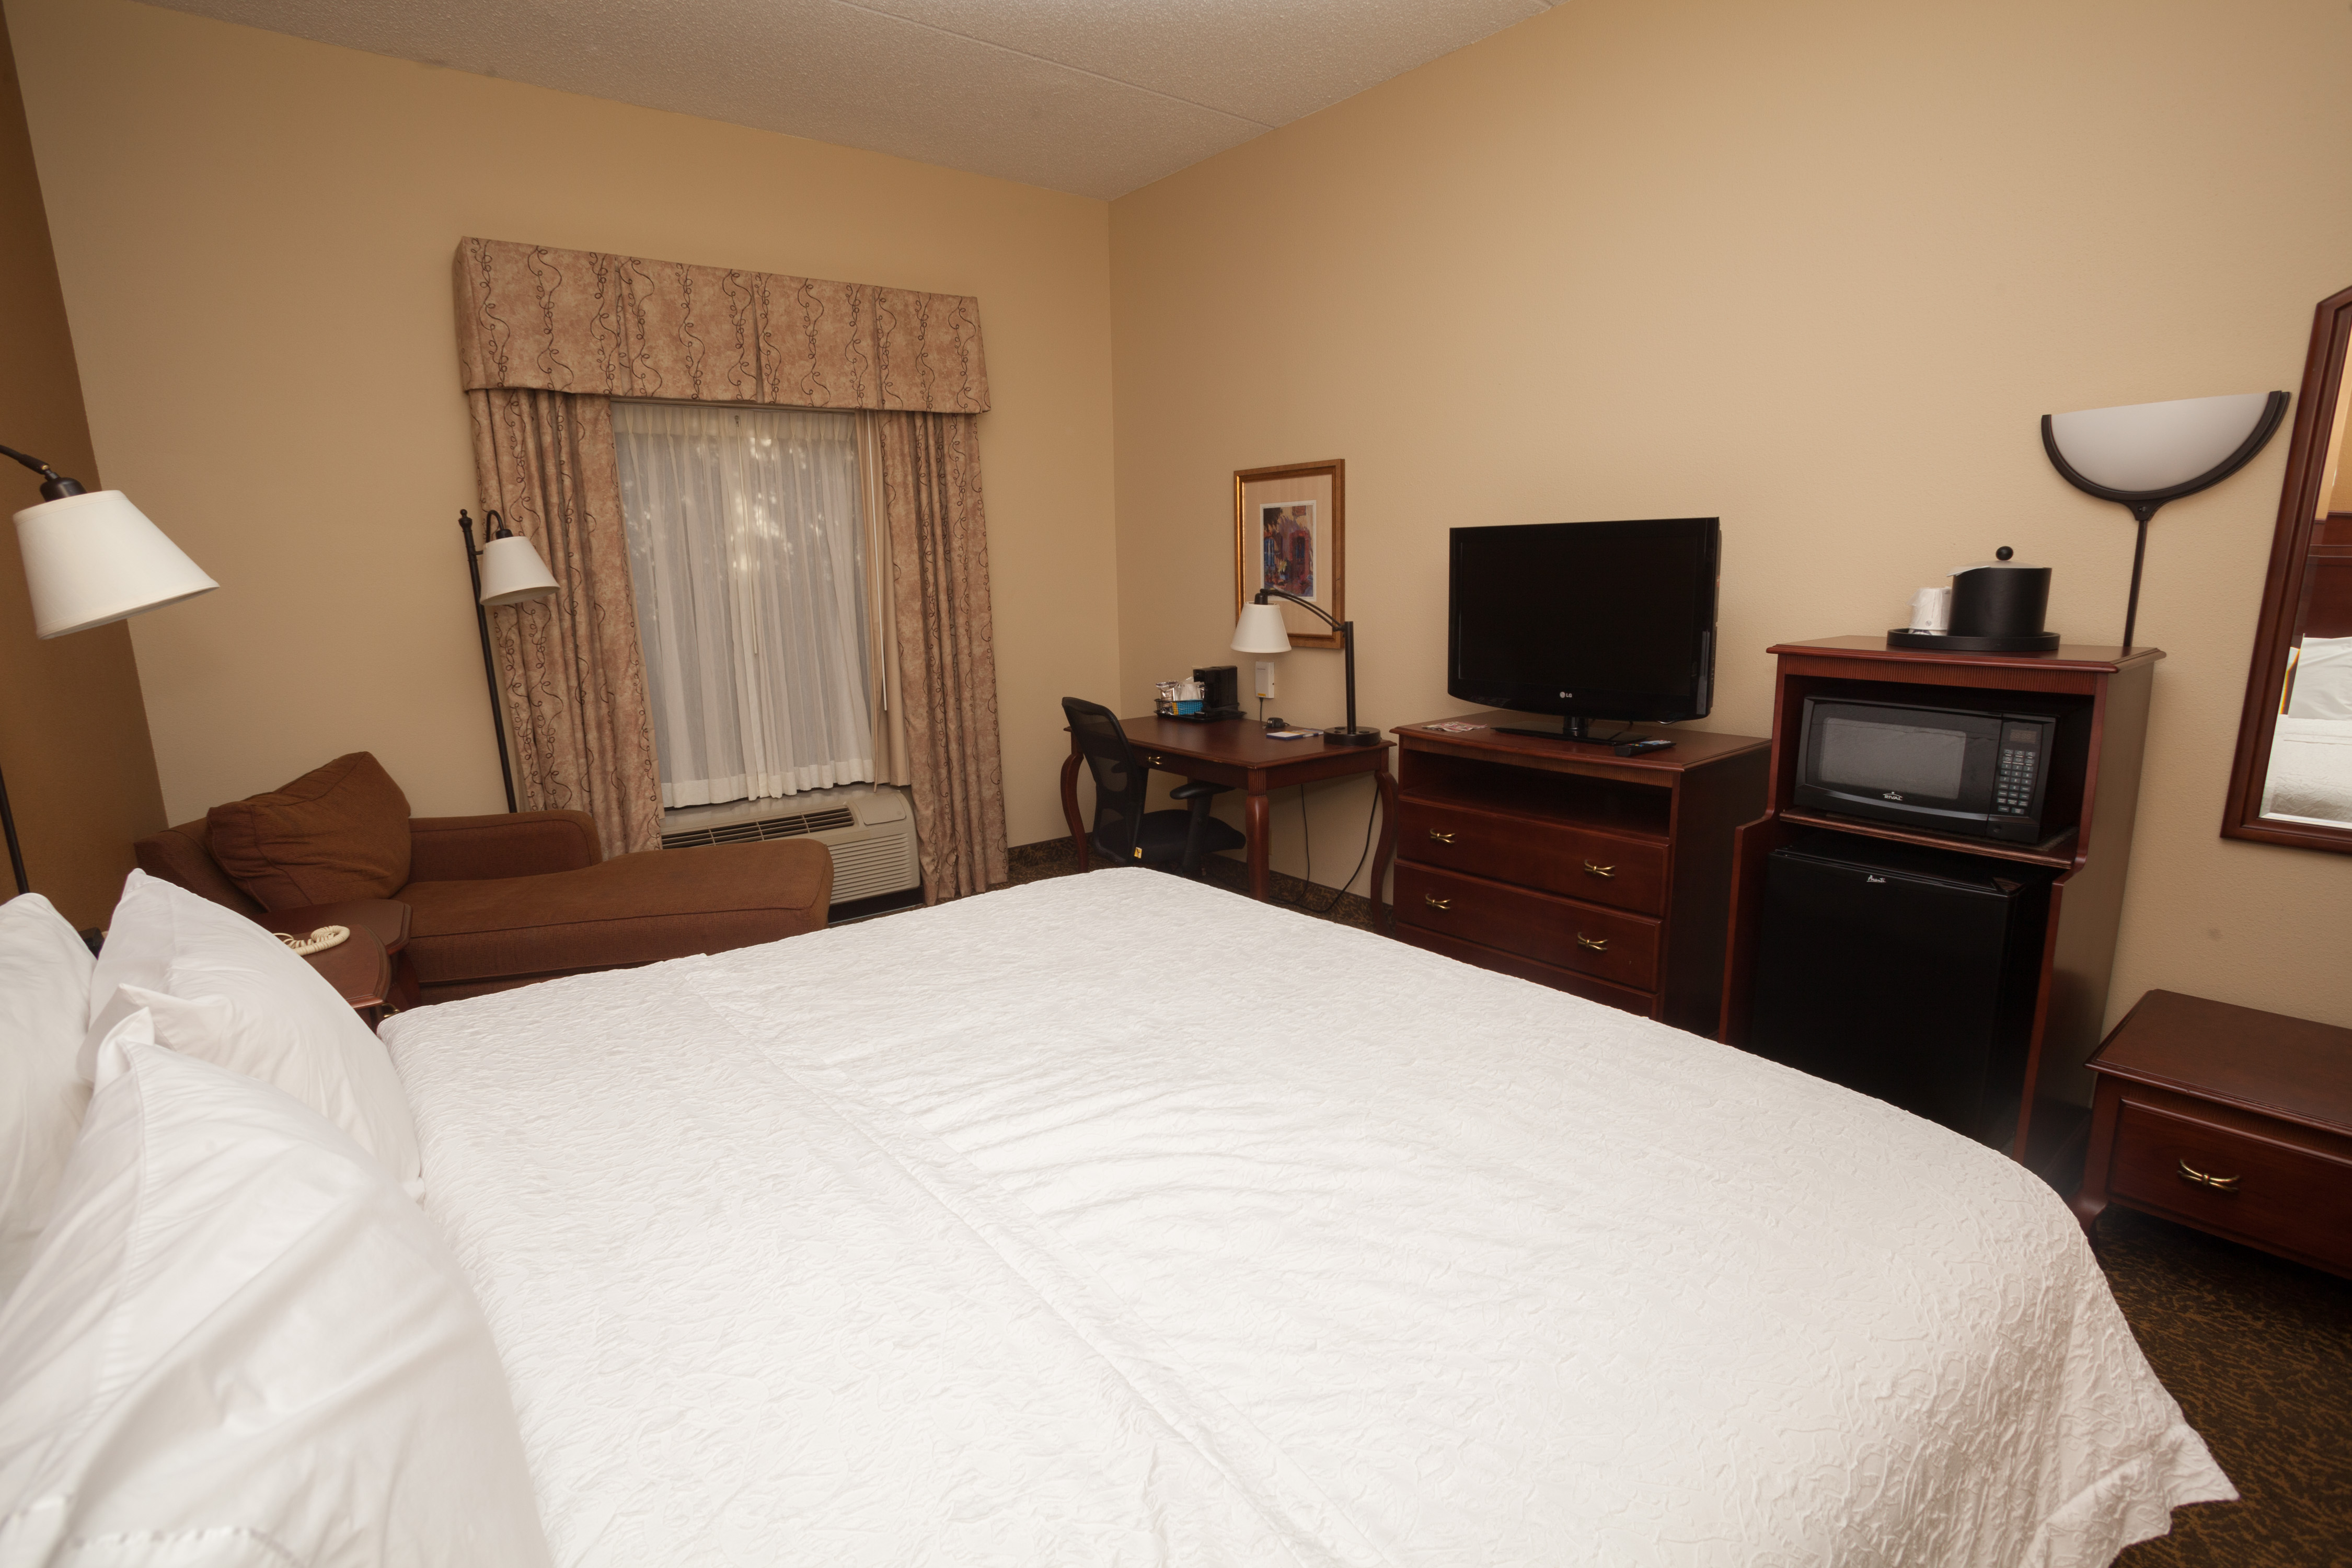 Large Bed in a Guest Room with Microwave HDTV and Desk Area